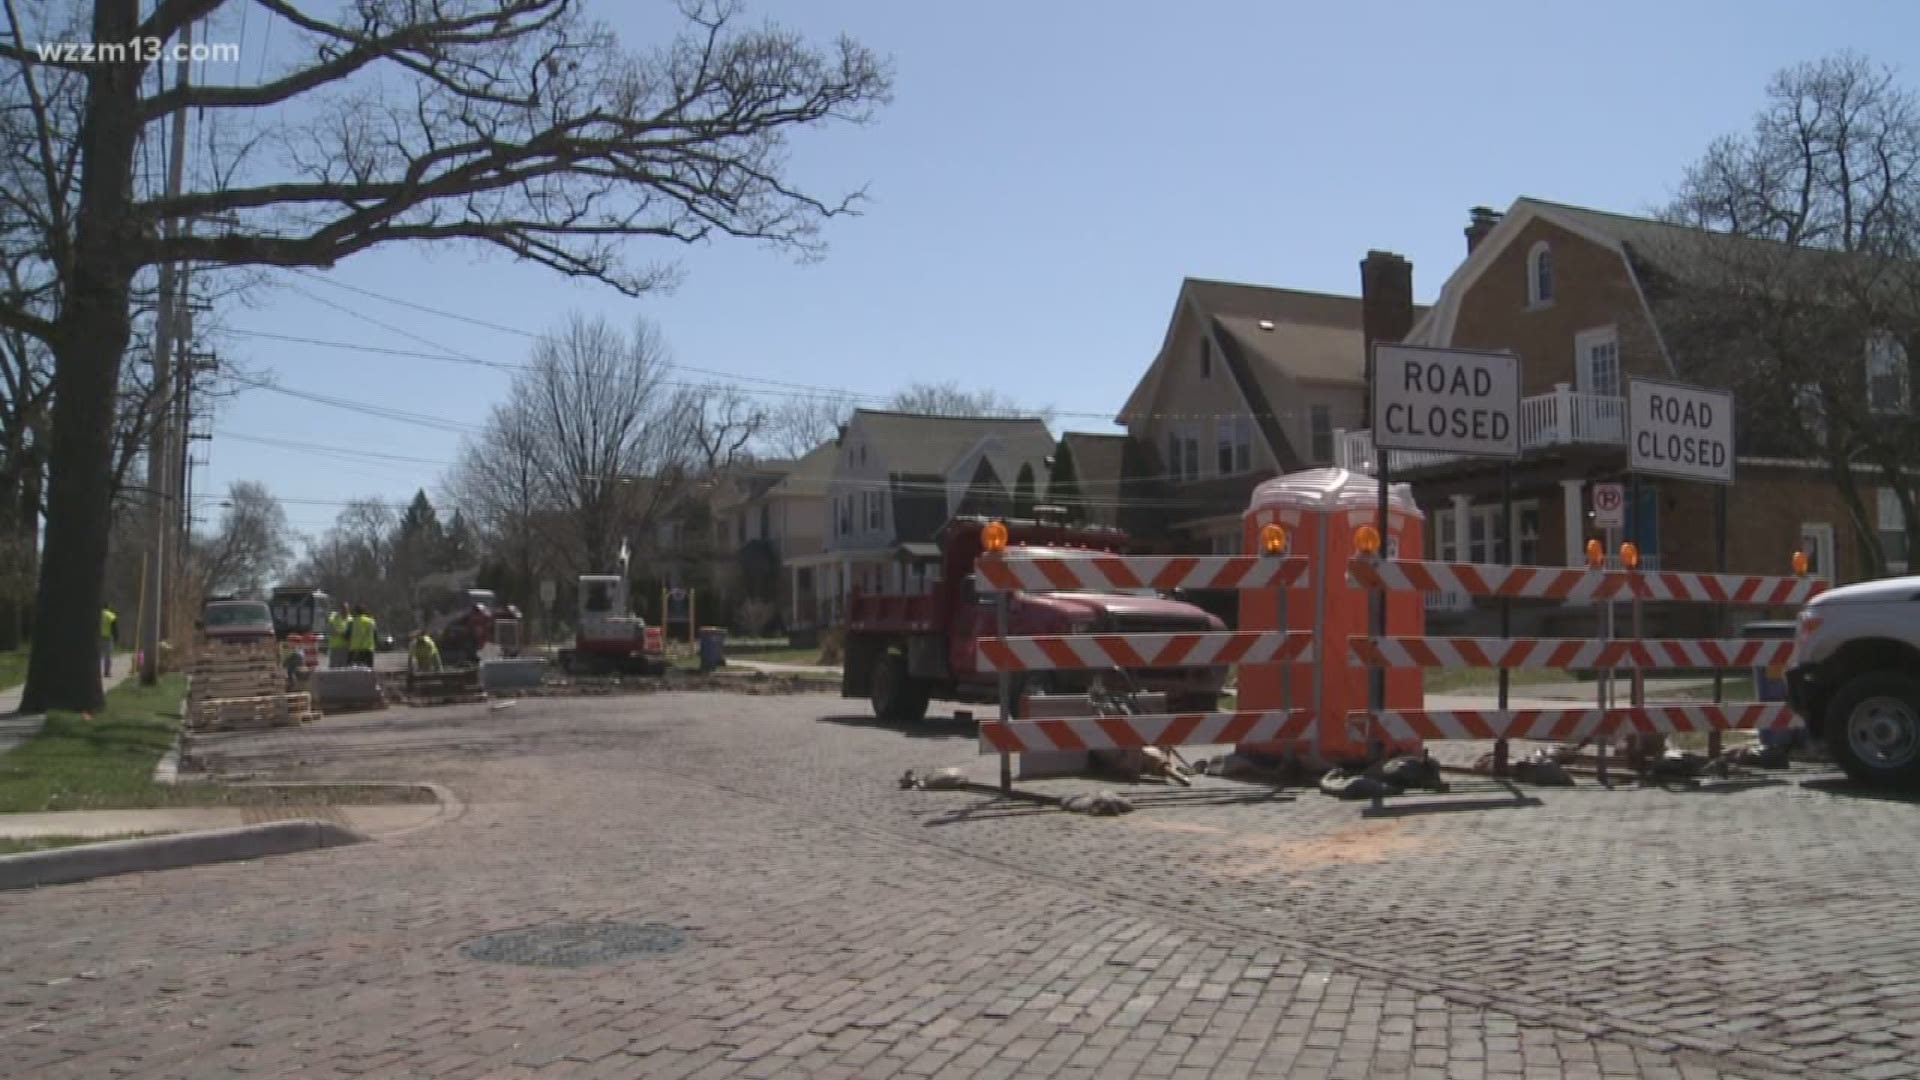 Part of Wealthy Street closes for brick work